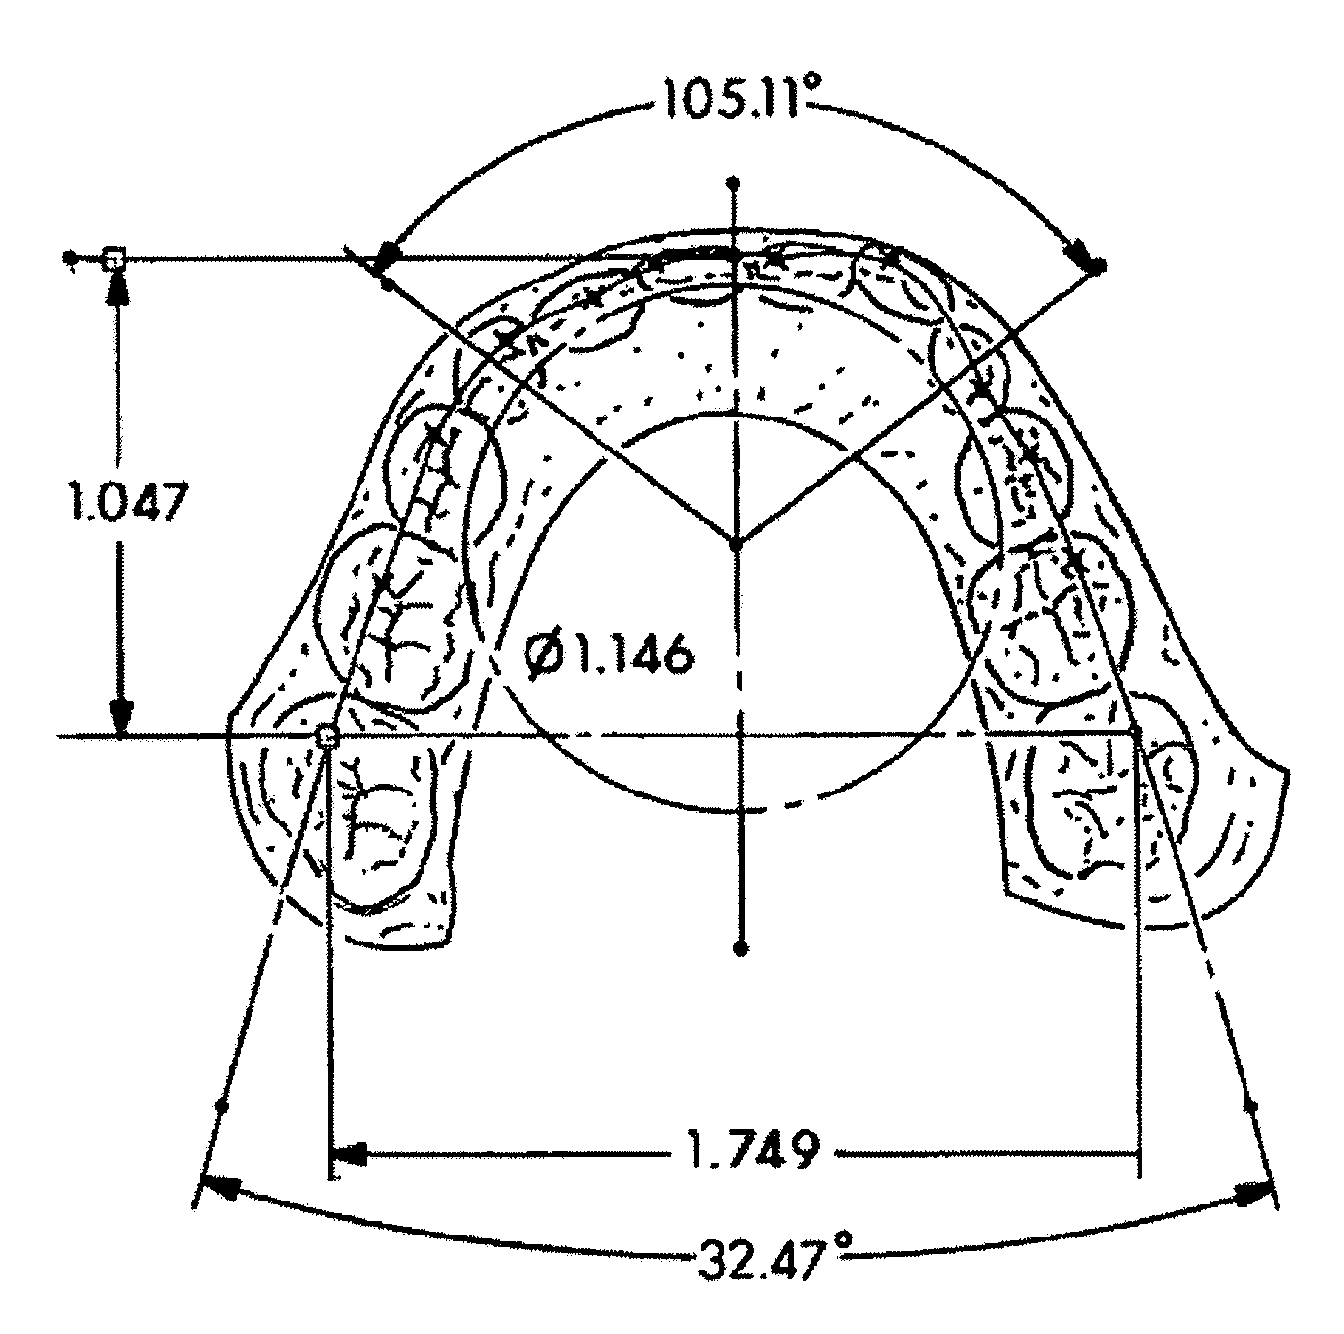 System and method for fabricating orthodontic aligners